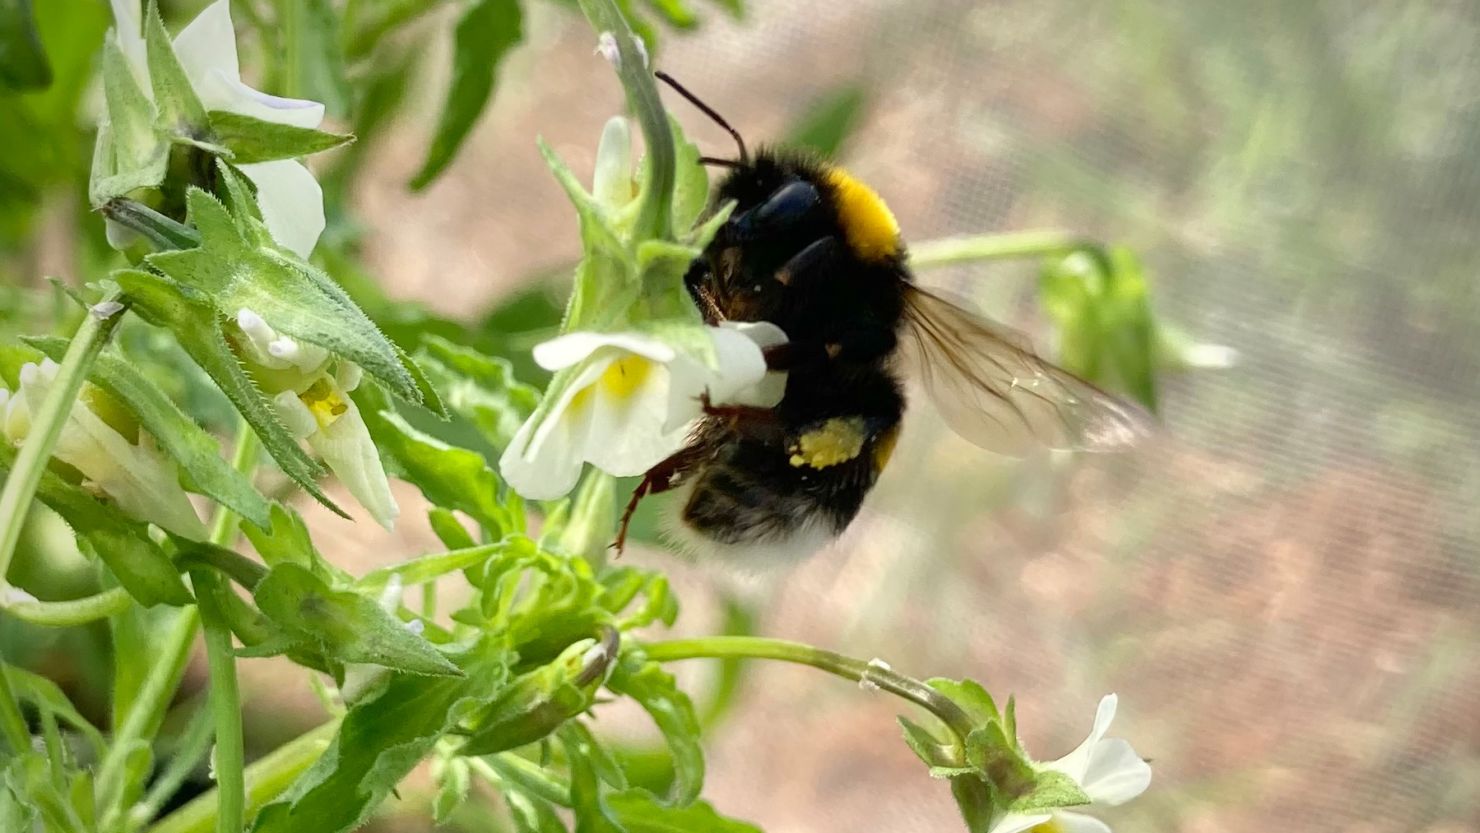 A bumblebee visits a field pansy flower during an experiment realized in this study.